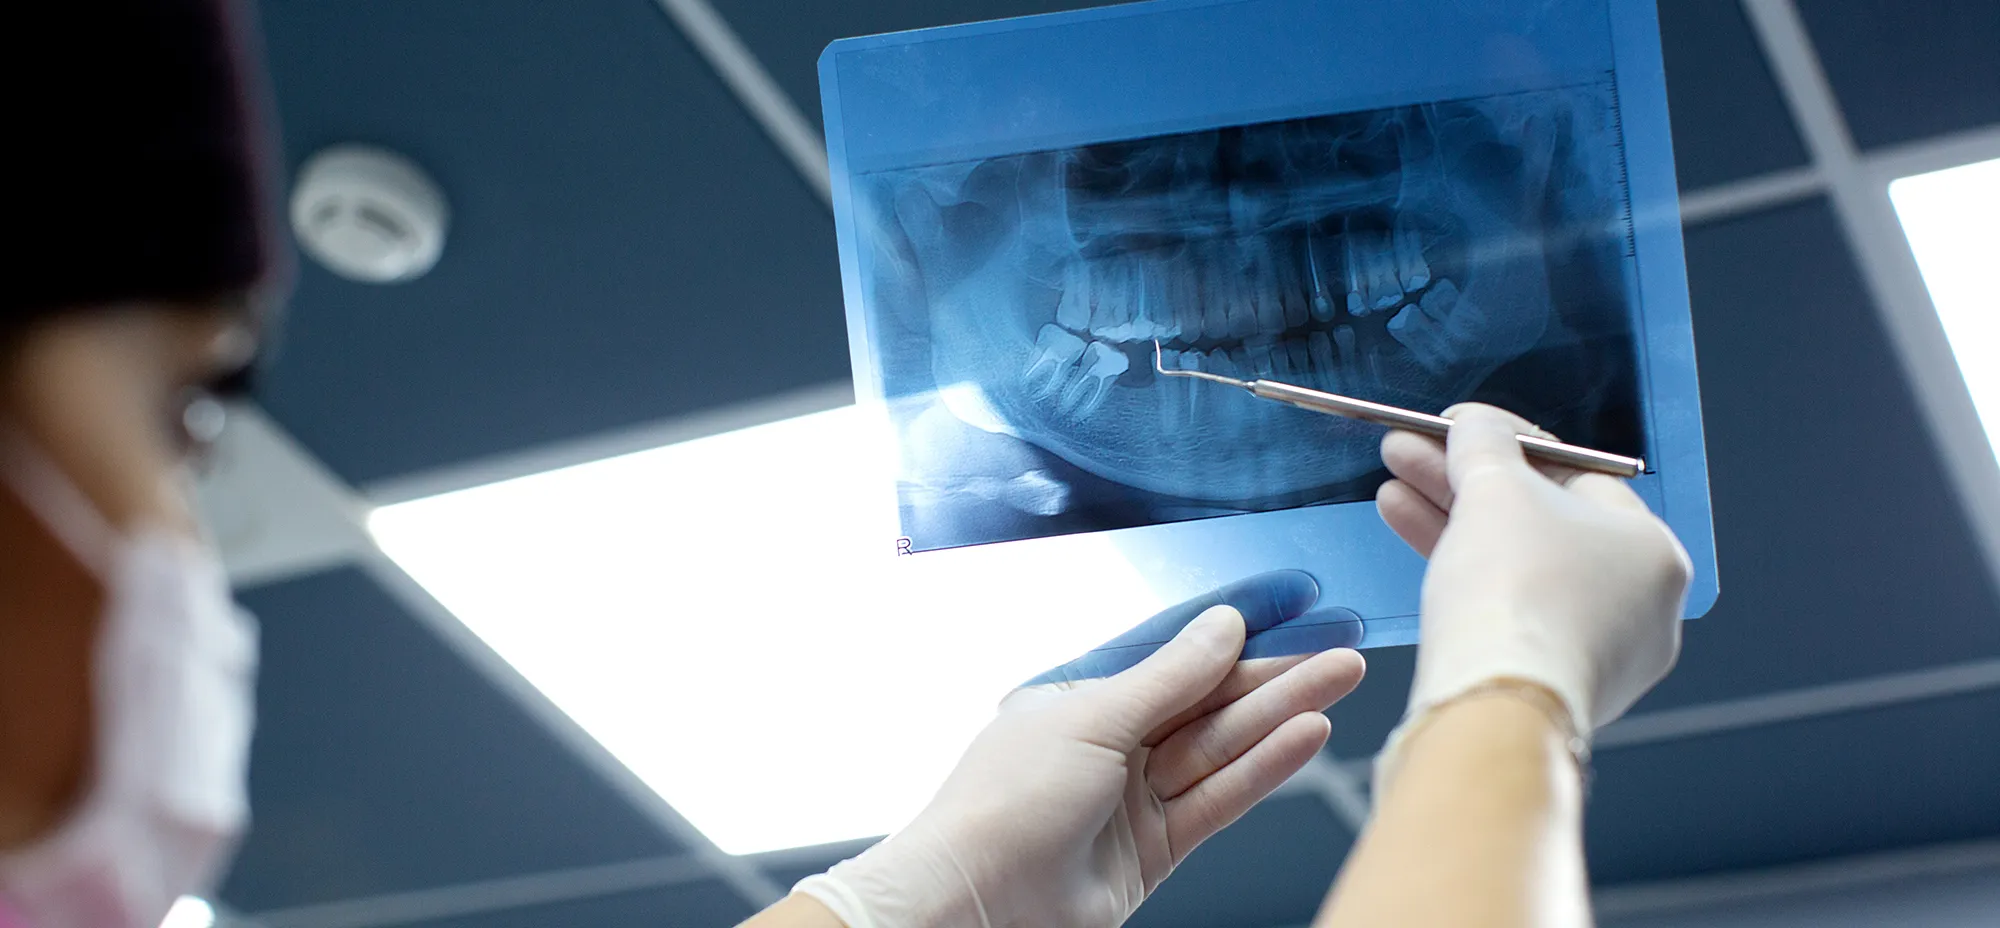 5 Features To Look For In Digital Dental Solutions In 2023